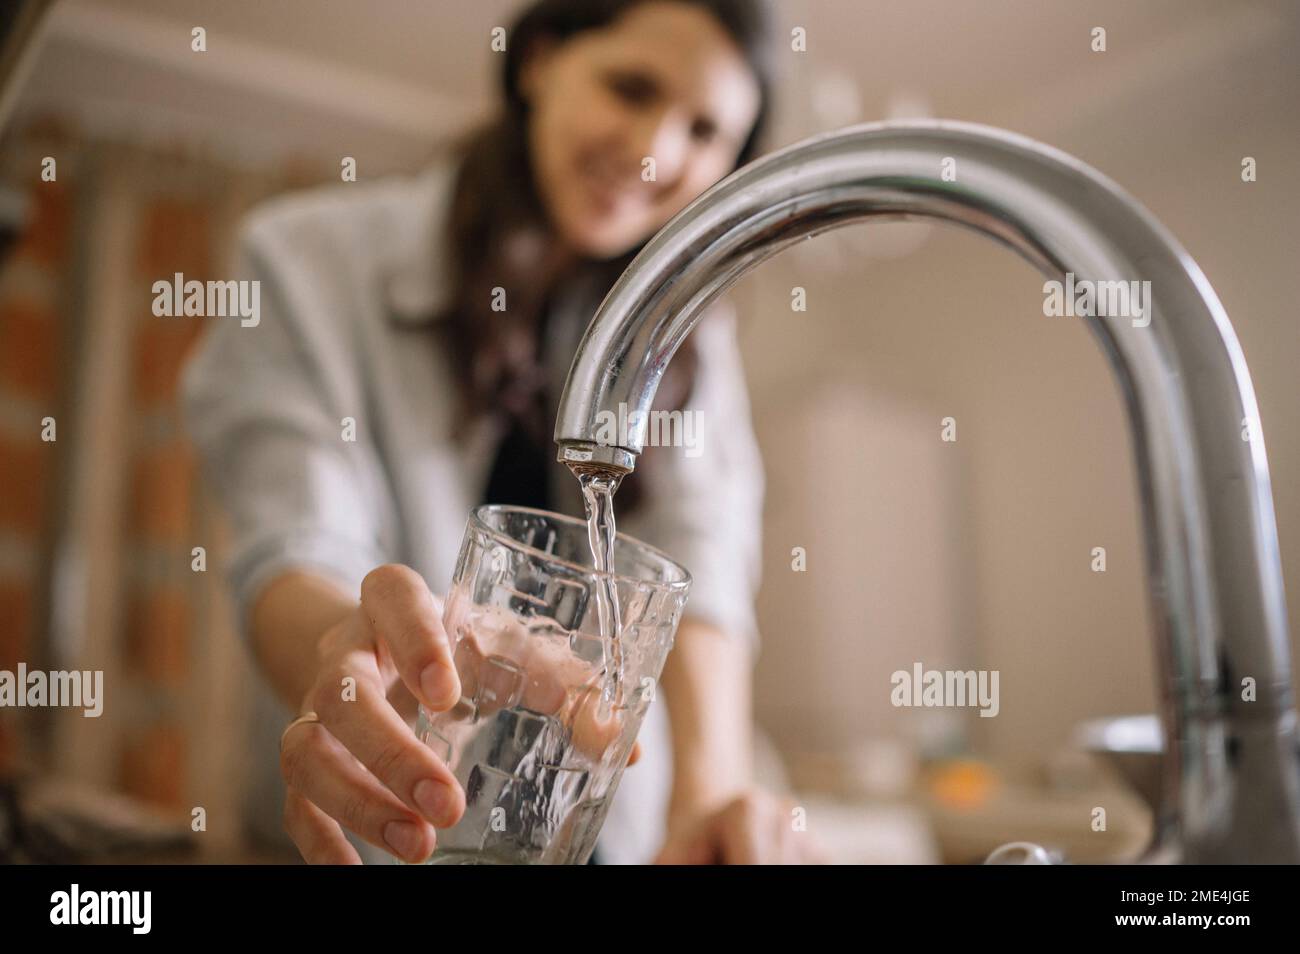 Woman filling water from faucet in glass at home Stock Photo